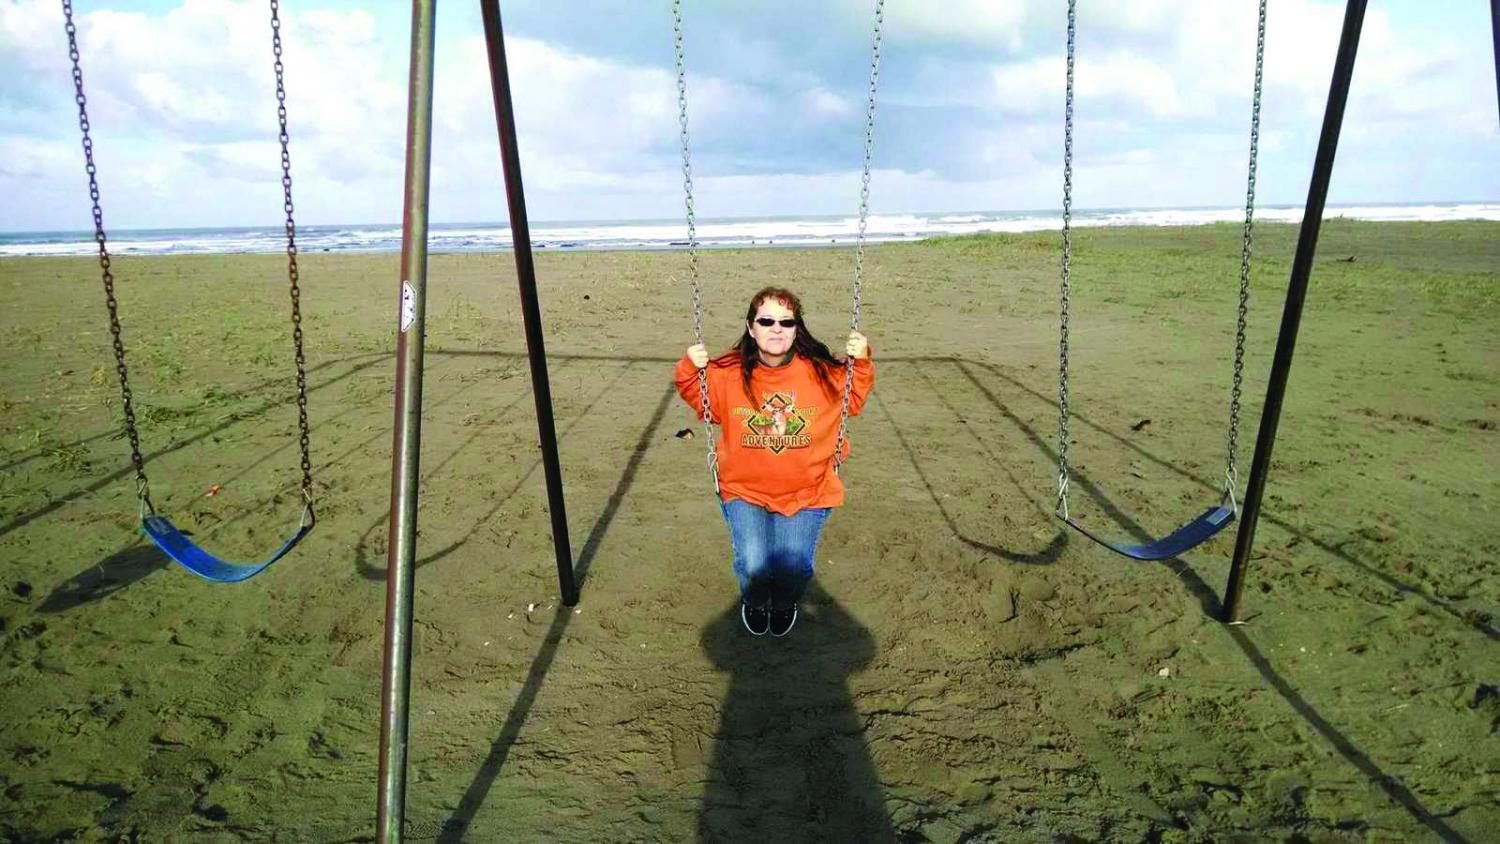 Arnett swings on the beach, ready to spend much of her retirement here.